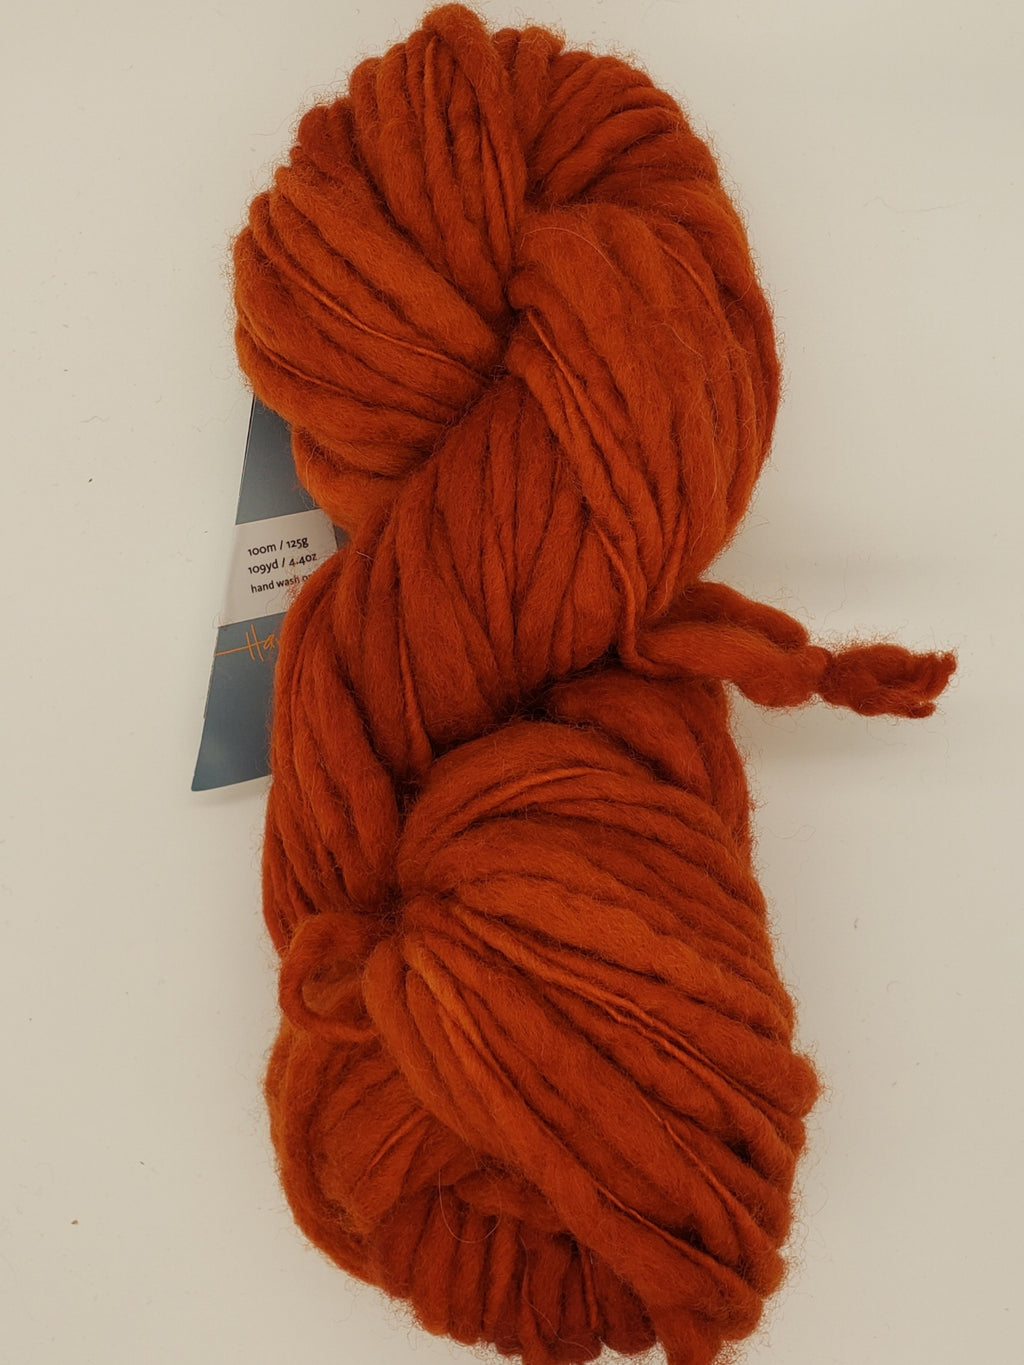 Slubby - PUMPKIN -  Merino/Blue Face Leicester - Hand Dyed Textured Yarn Thick and Thin  - Shades of Orange